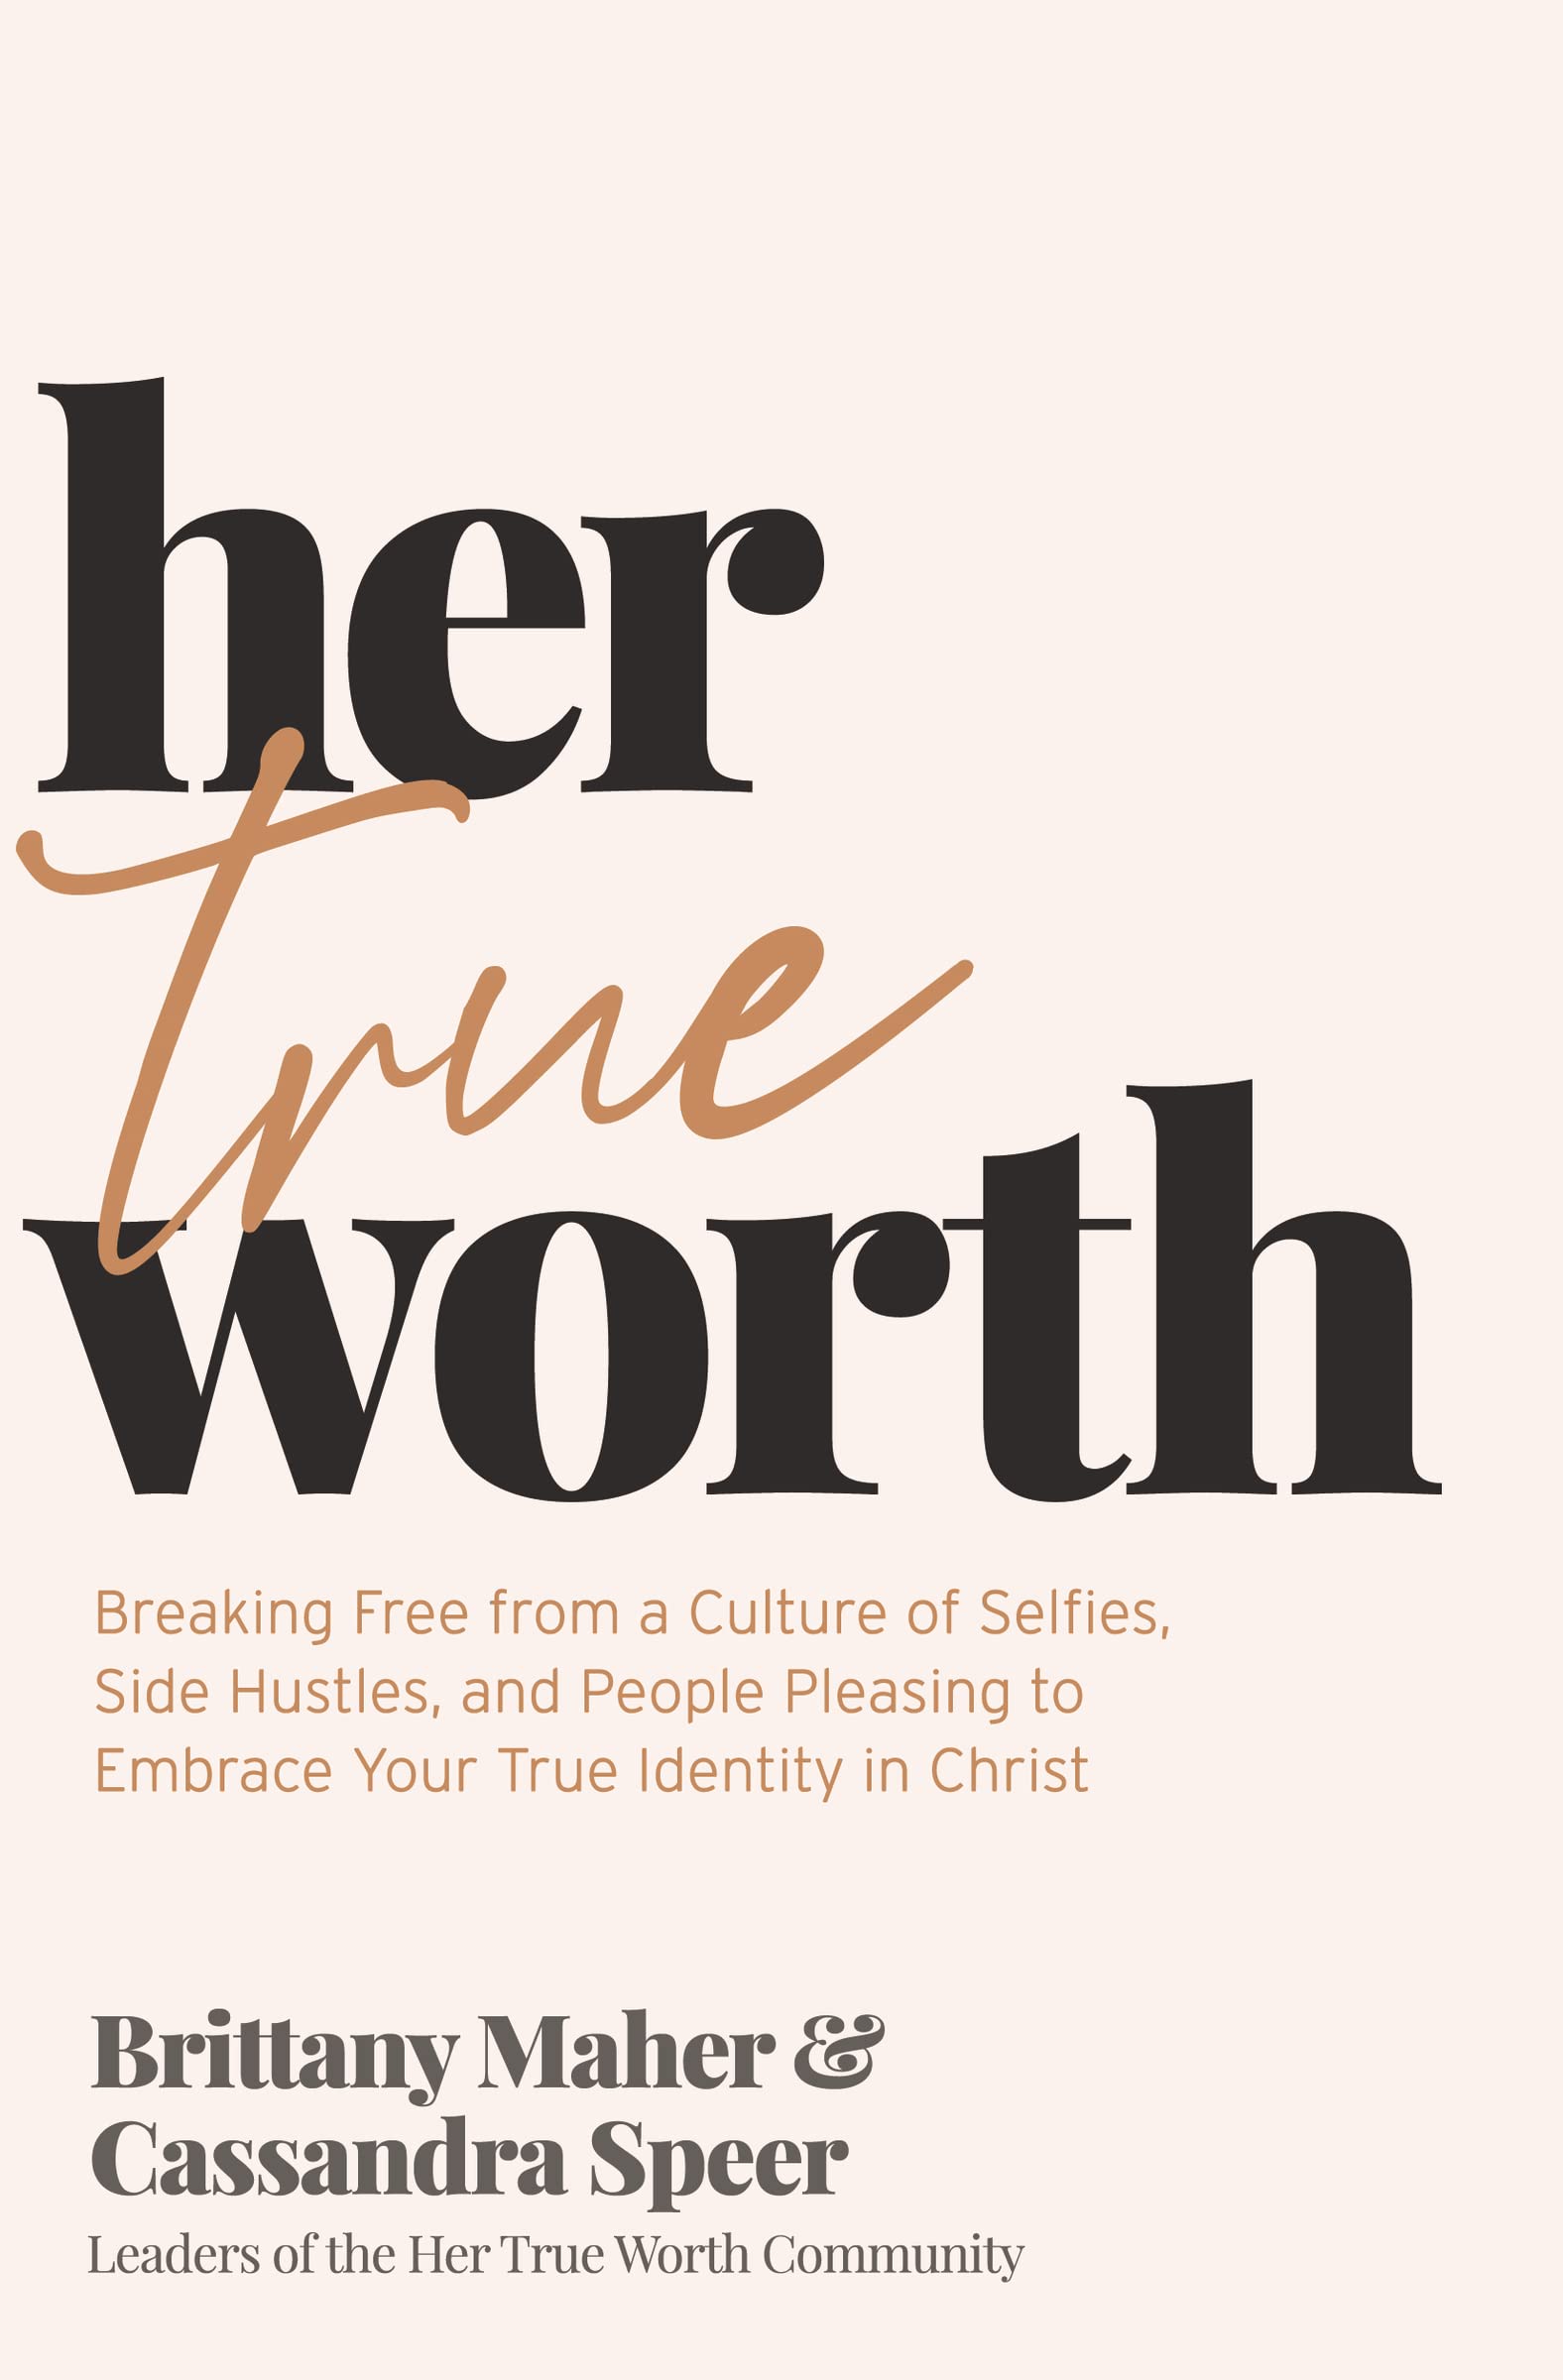 Her True Worth: Breaking Free from a Culture of Selfies, Side Hustles, and People Pleasing to Embrace Your True Identity in Christ | books about self-worth